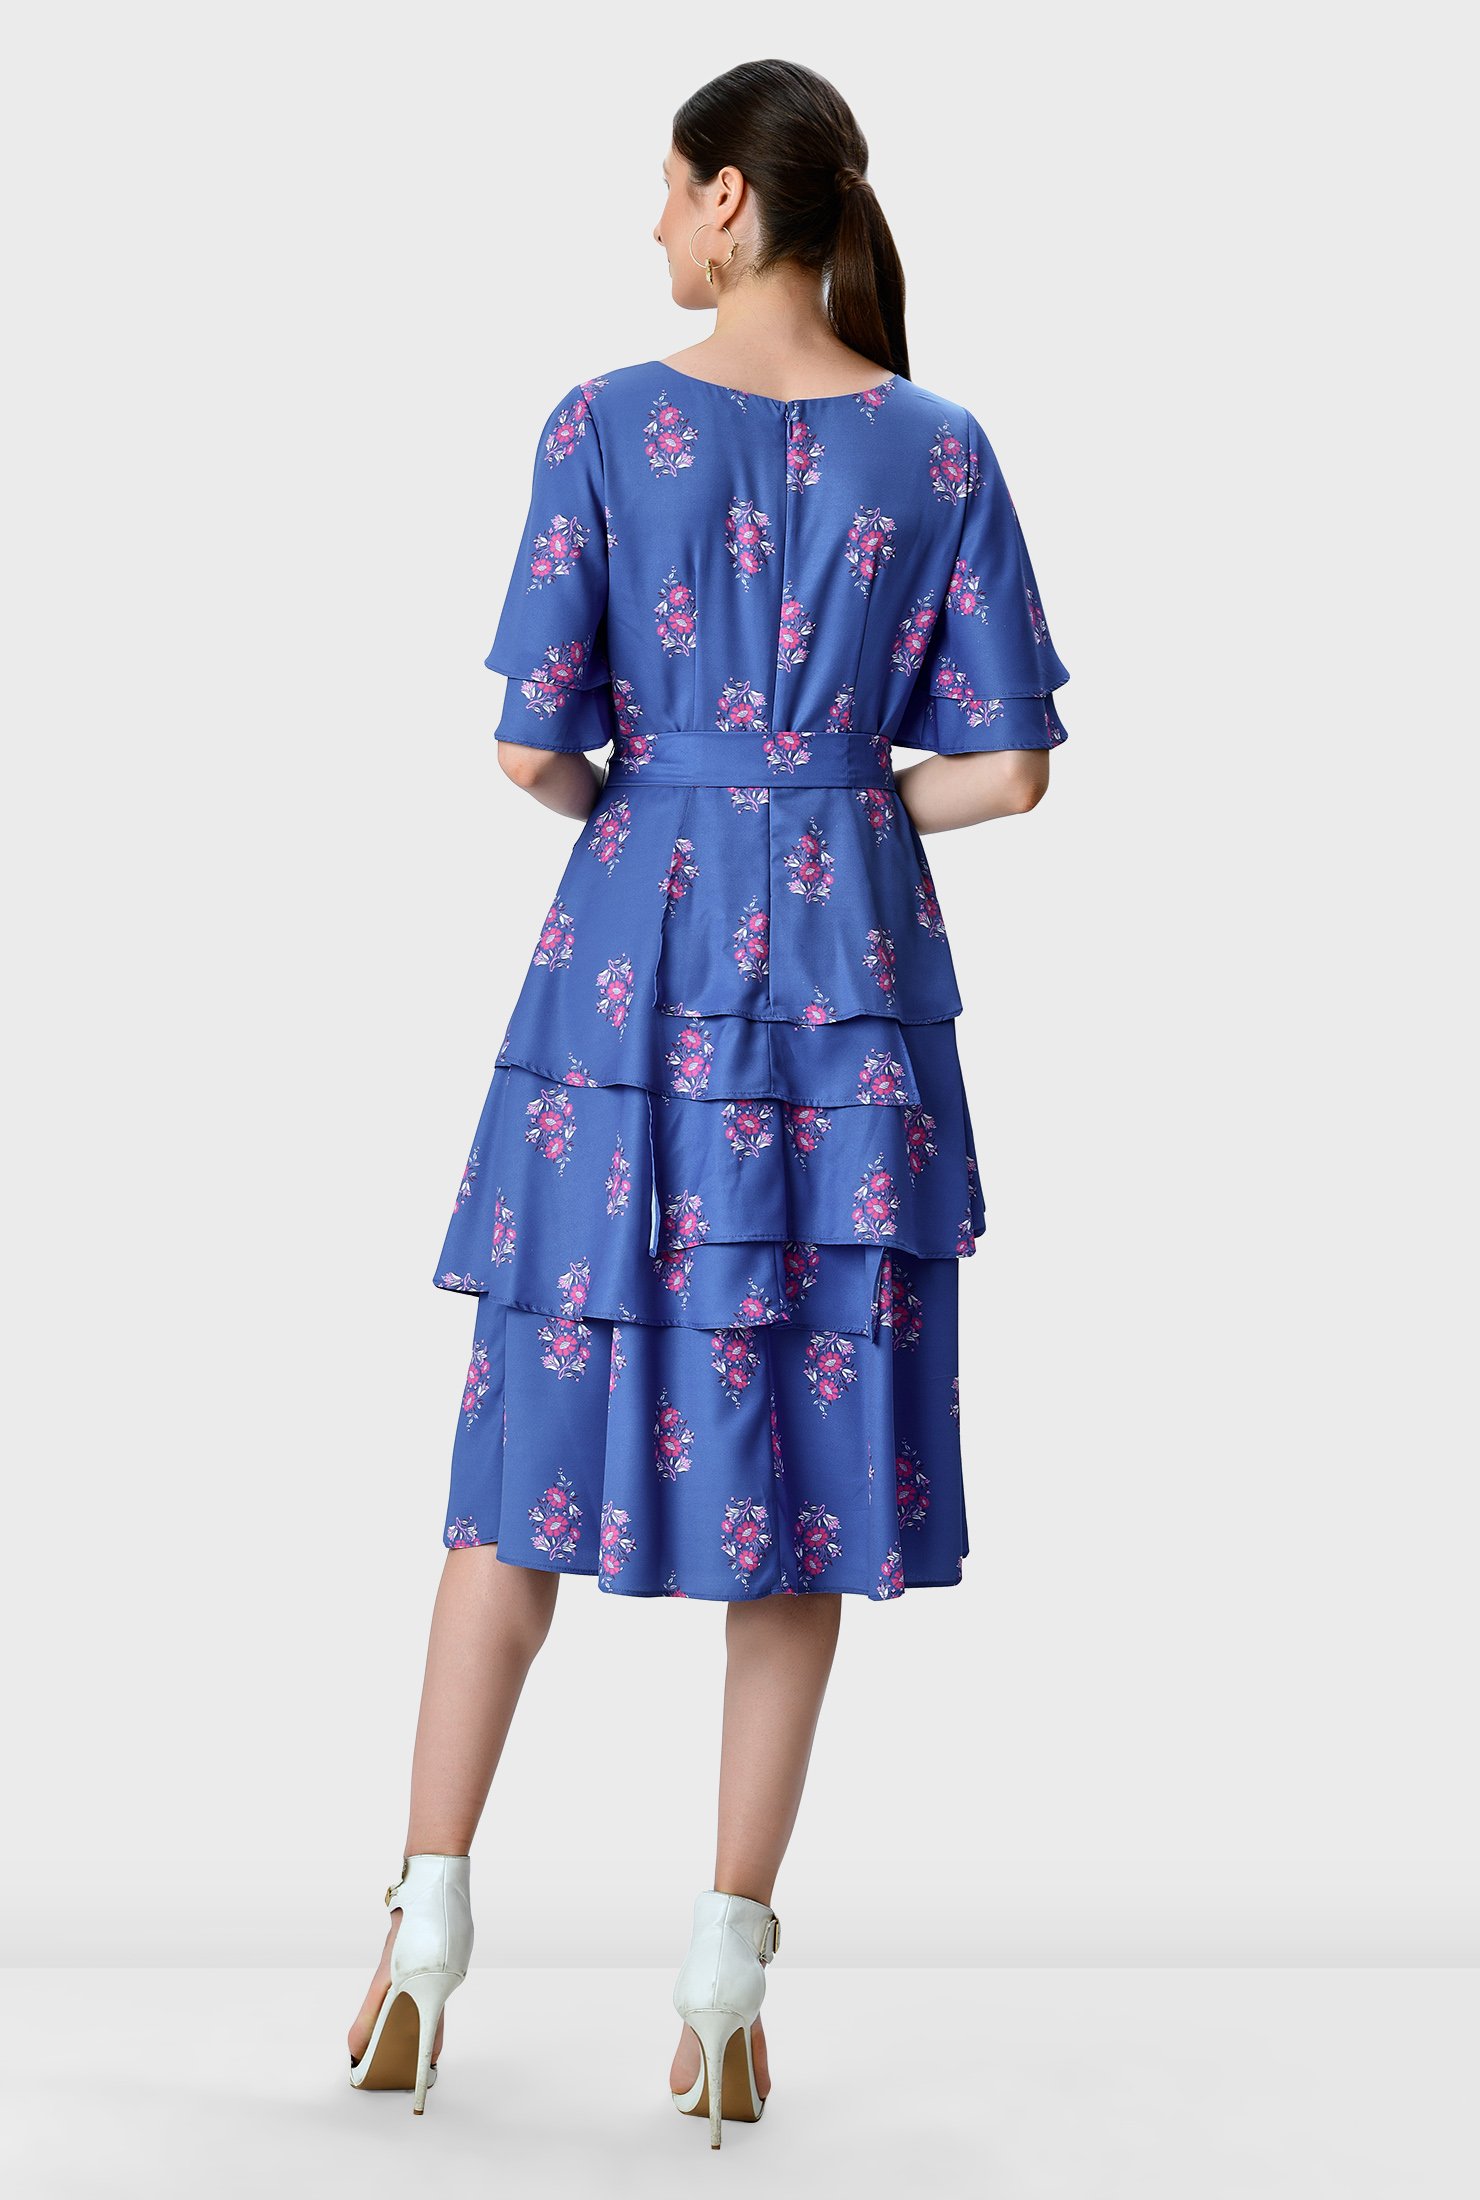 A summer stunner! Fluttering ruffles cascade down the sleeves and asymmetric tier skirt of our floral print crepe fit-and-flare dress that will bring feminine charm and a bit of romance to your upcoming events.